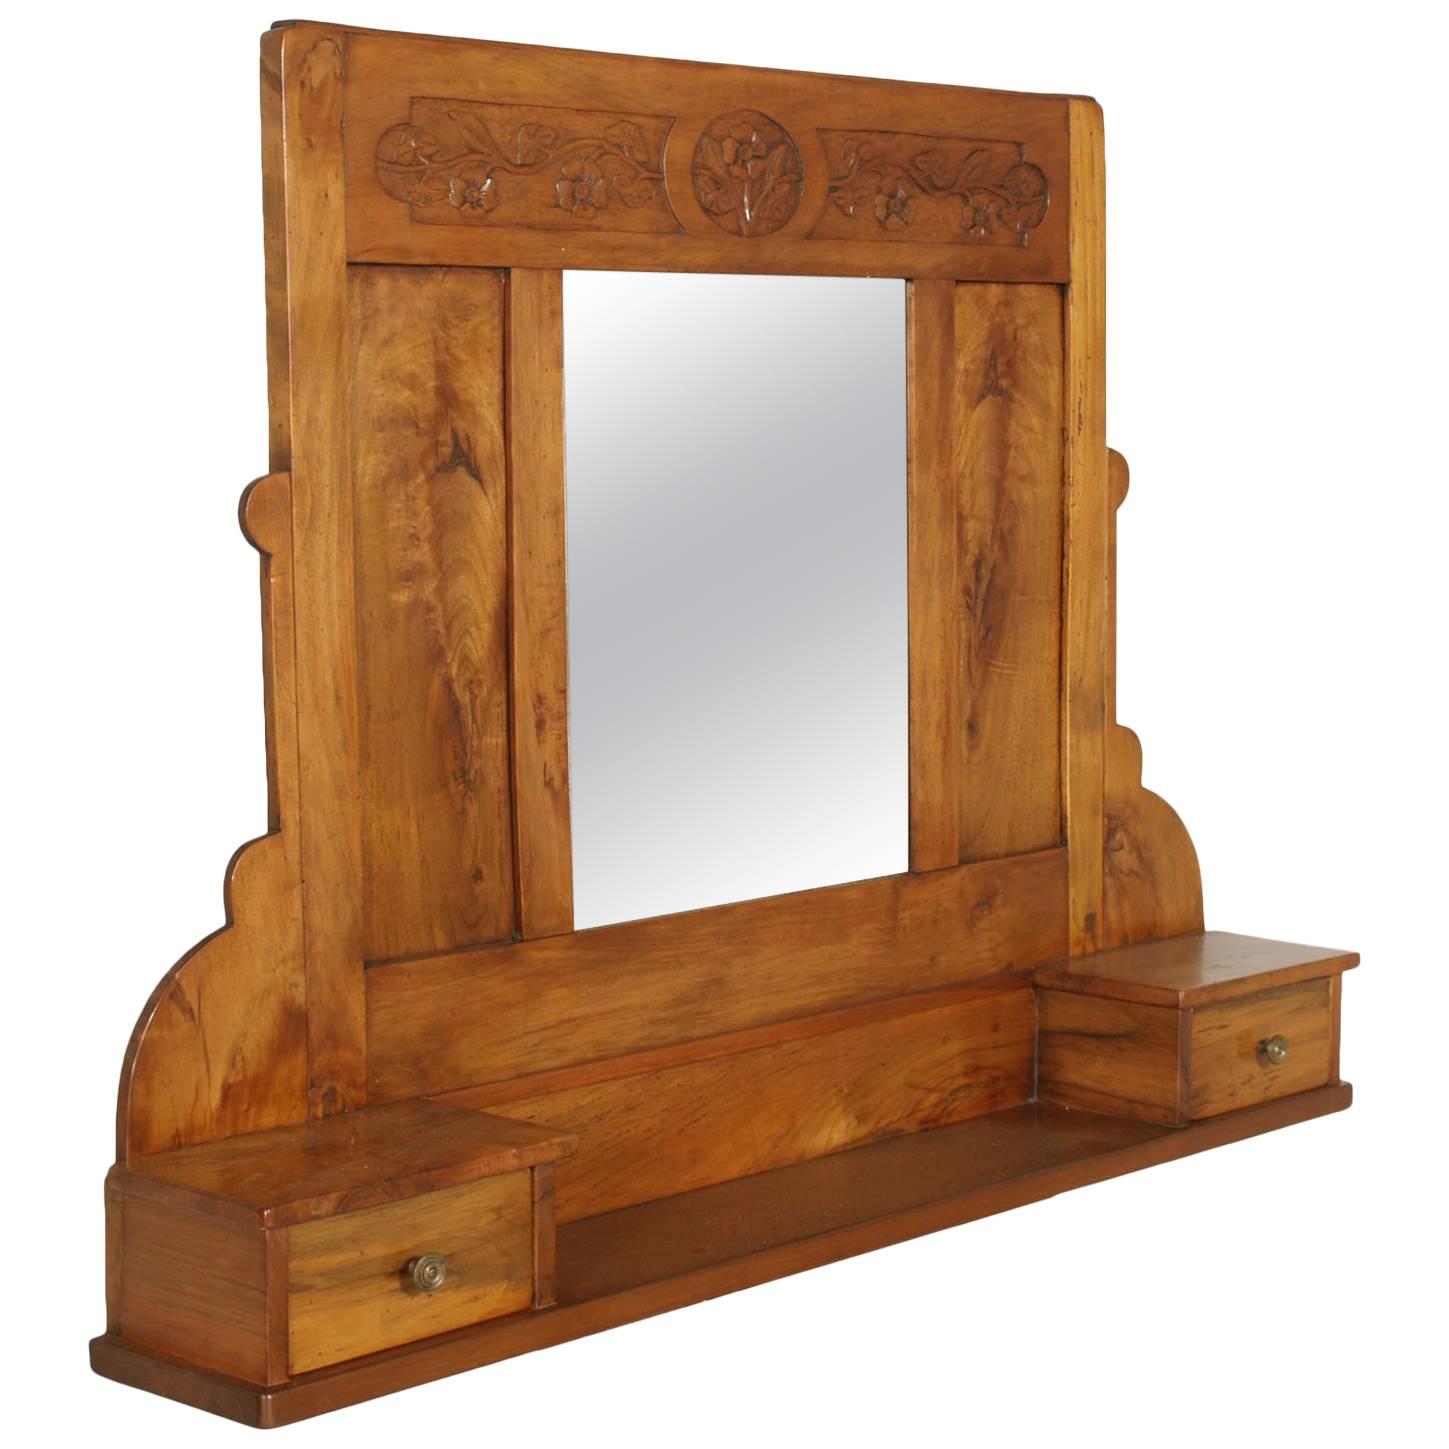 Art Nouveau Wall Mirror in Hand-Carved Blond Walnut with Shelf and Two Drawers